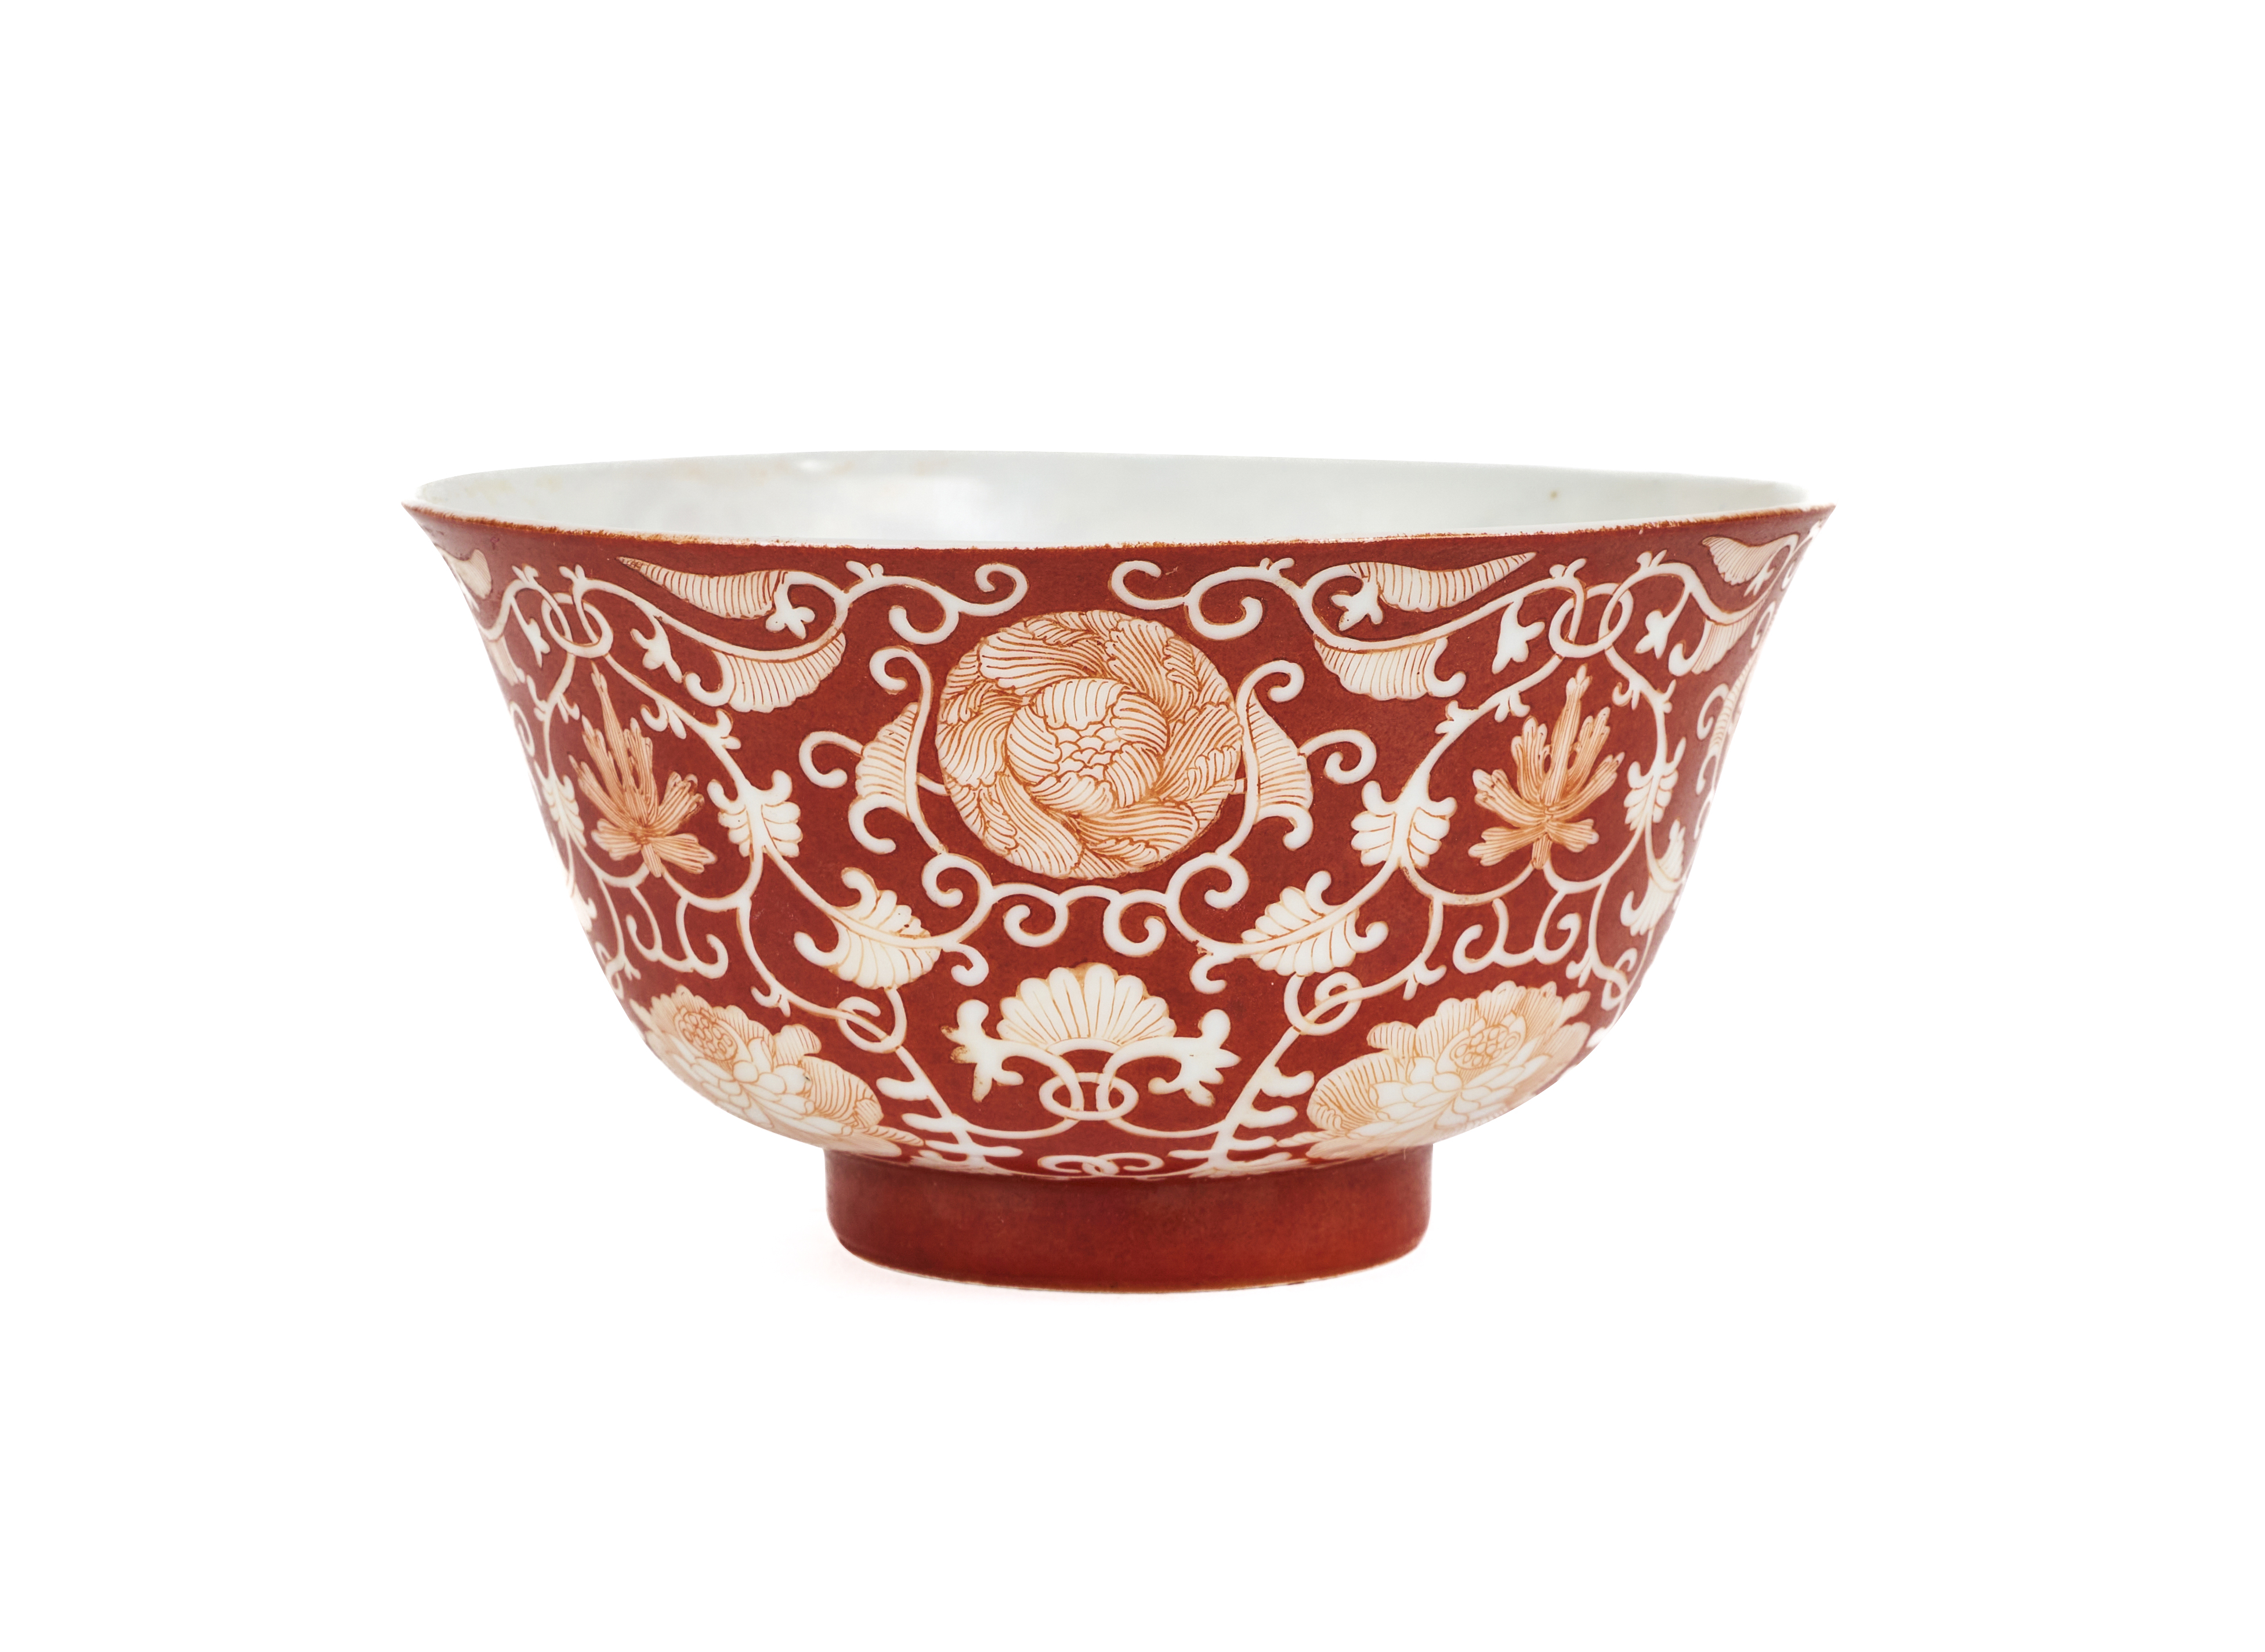 A CHINESE CORAL GROUND RED BOWL, QING DYNASTY (1644-1911)